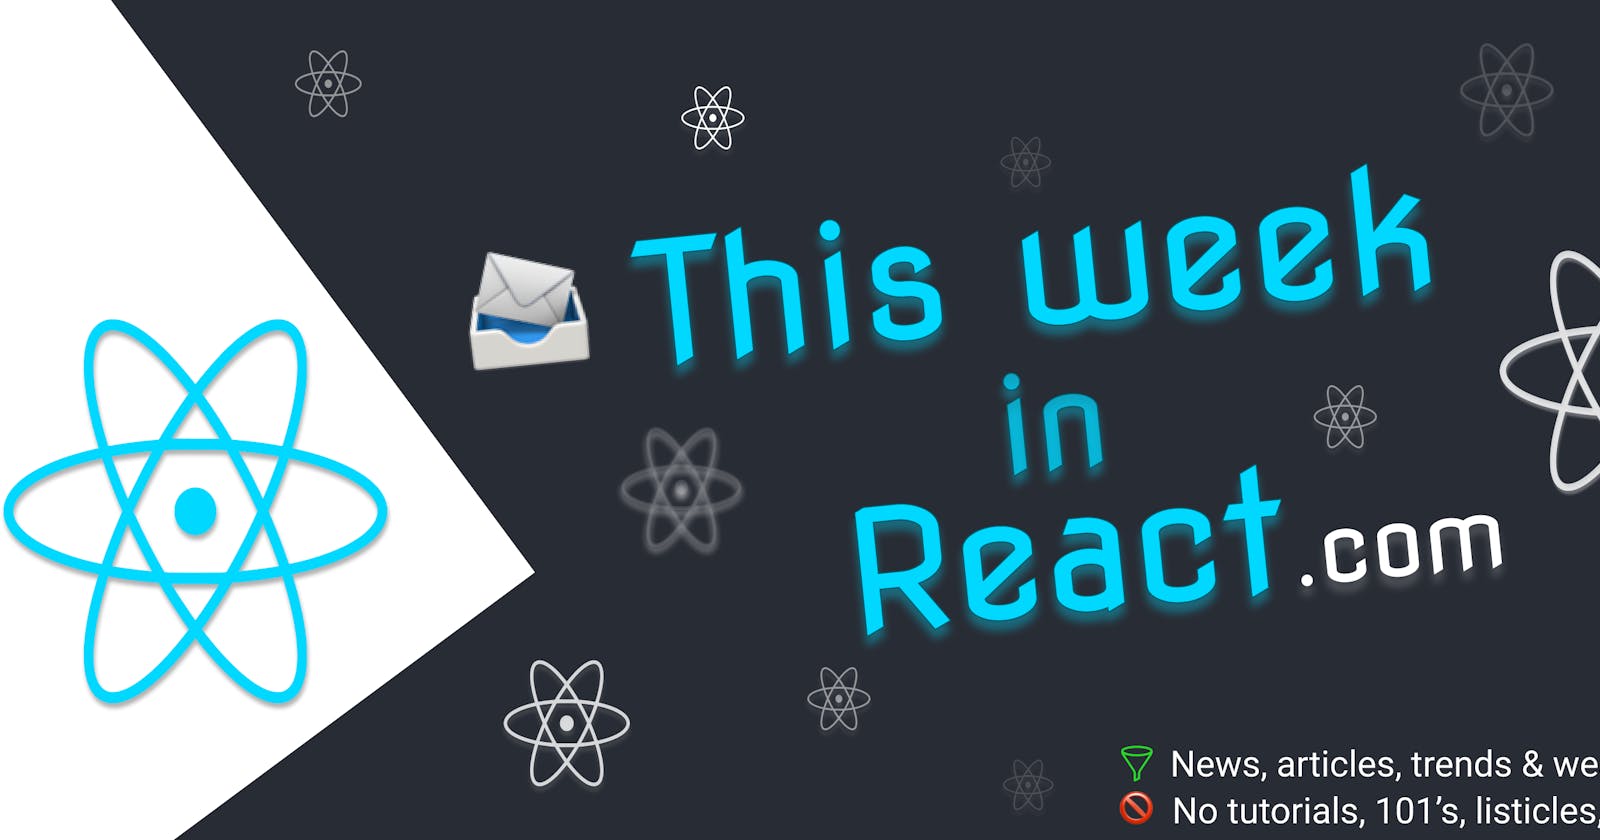 This Week In React #172: Next.js, PPR, Remotion, State of React Native, Parcel, Panda, StyleX, Cosmos, Remix, RTK, TypeScript, Skia, Reanimated...